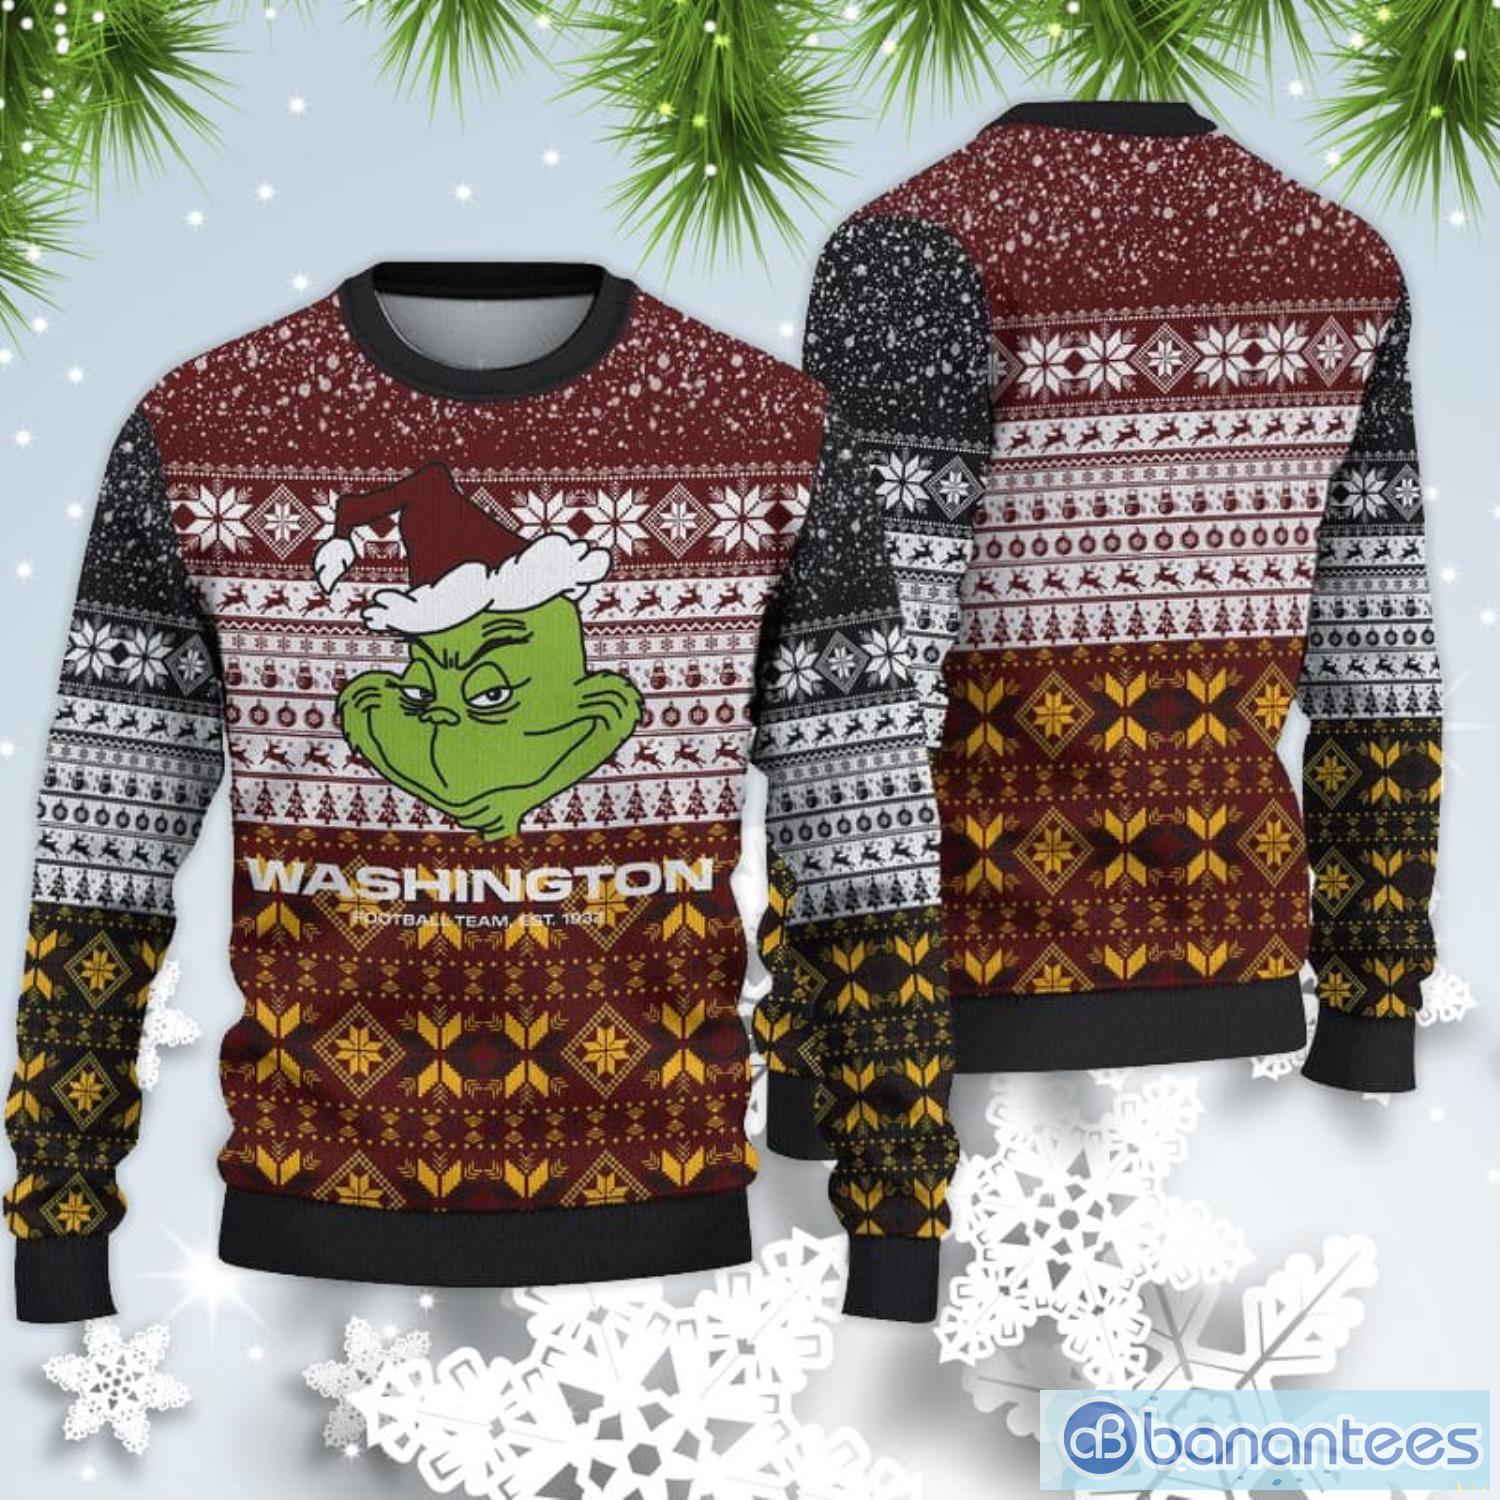 Washington Football Team Christmas Grinch Sweater For Fans Product Photo 1